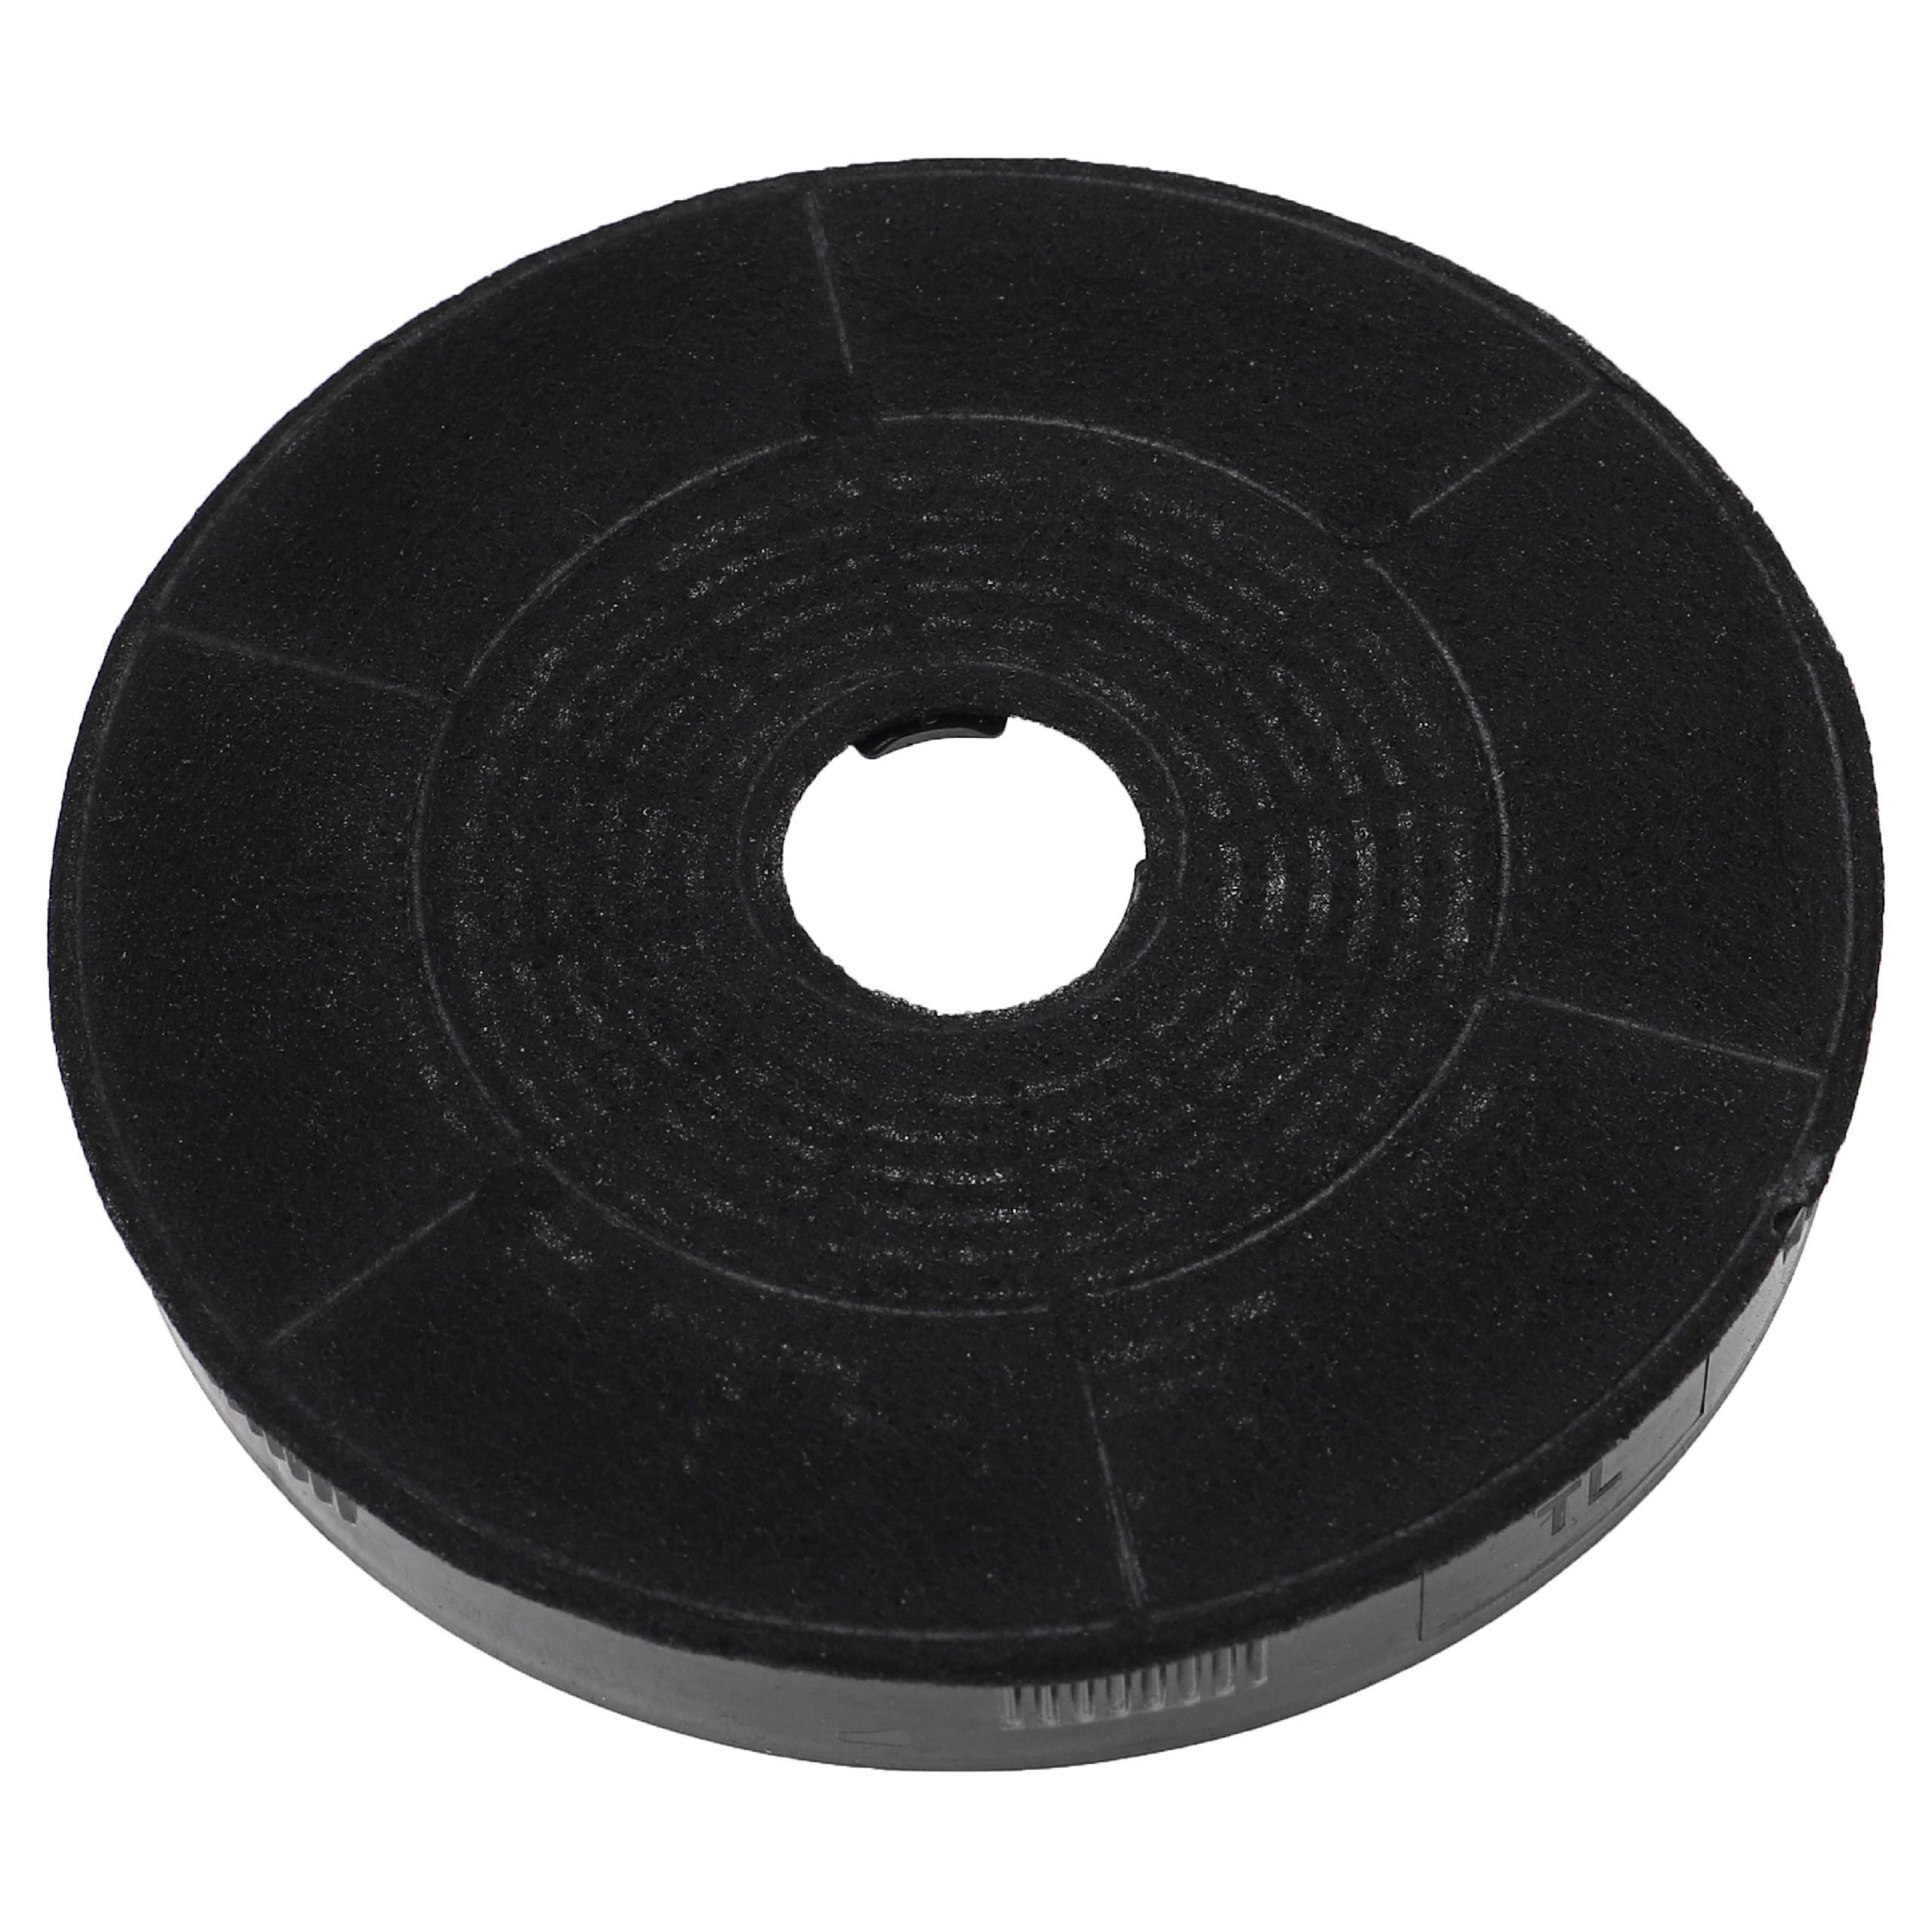 Activated Carbon Filter as Replacement for Amica KF 17146 for Bosch Hob etc. - 16 cm